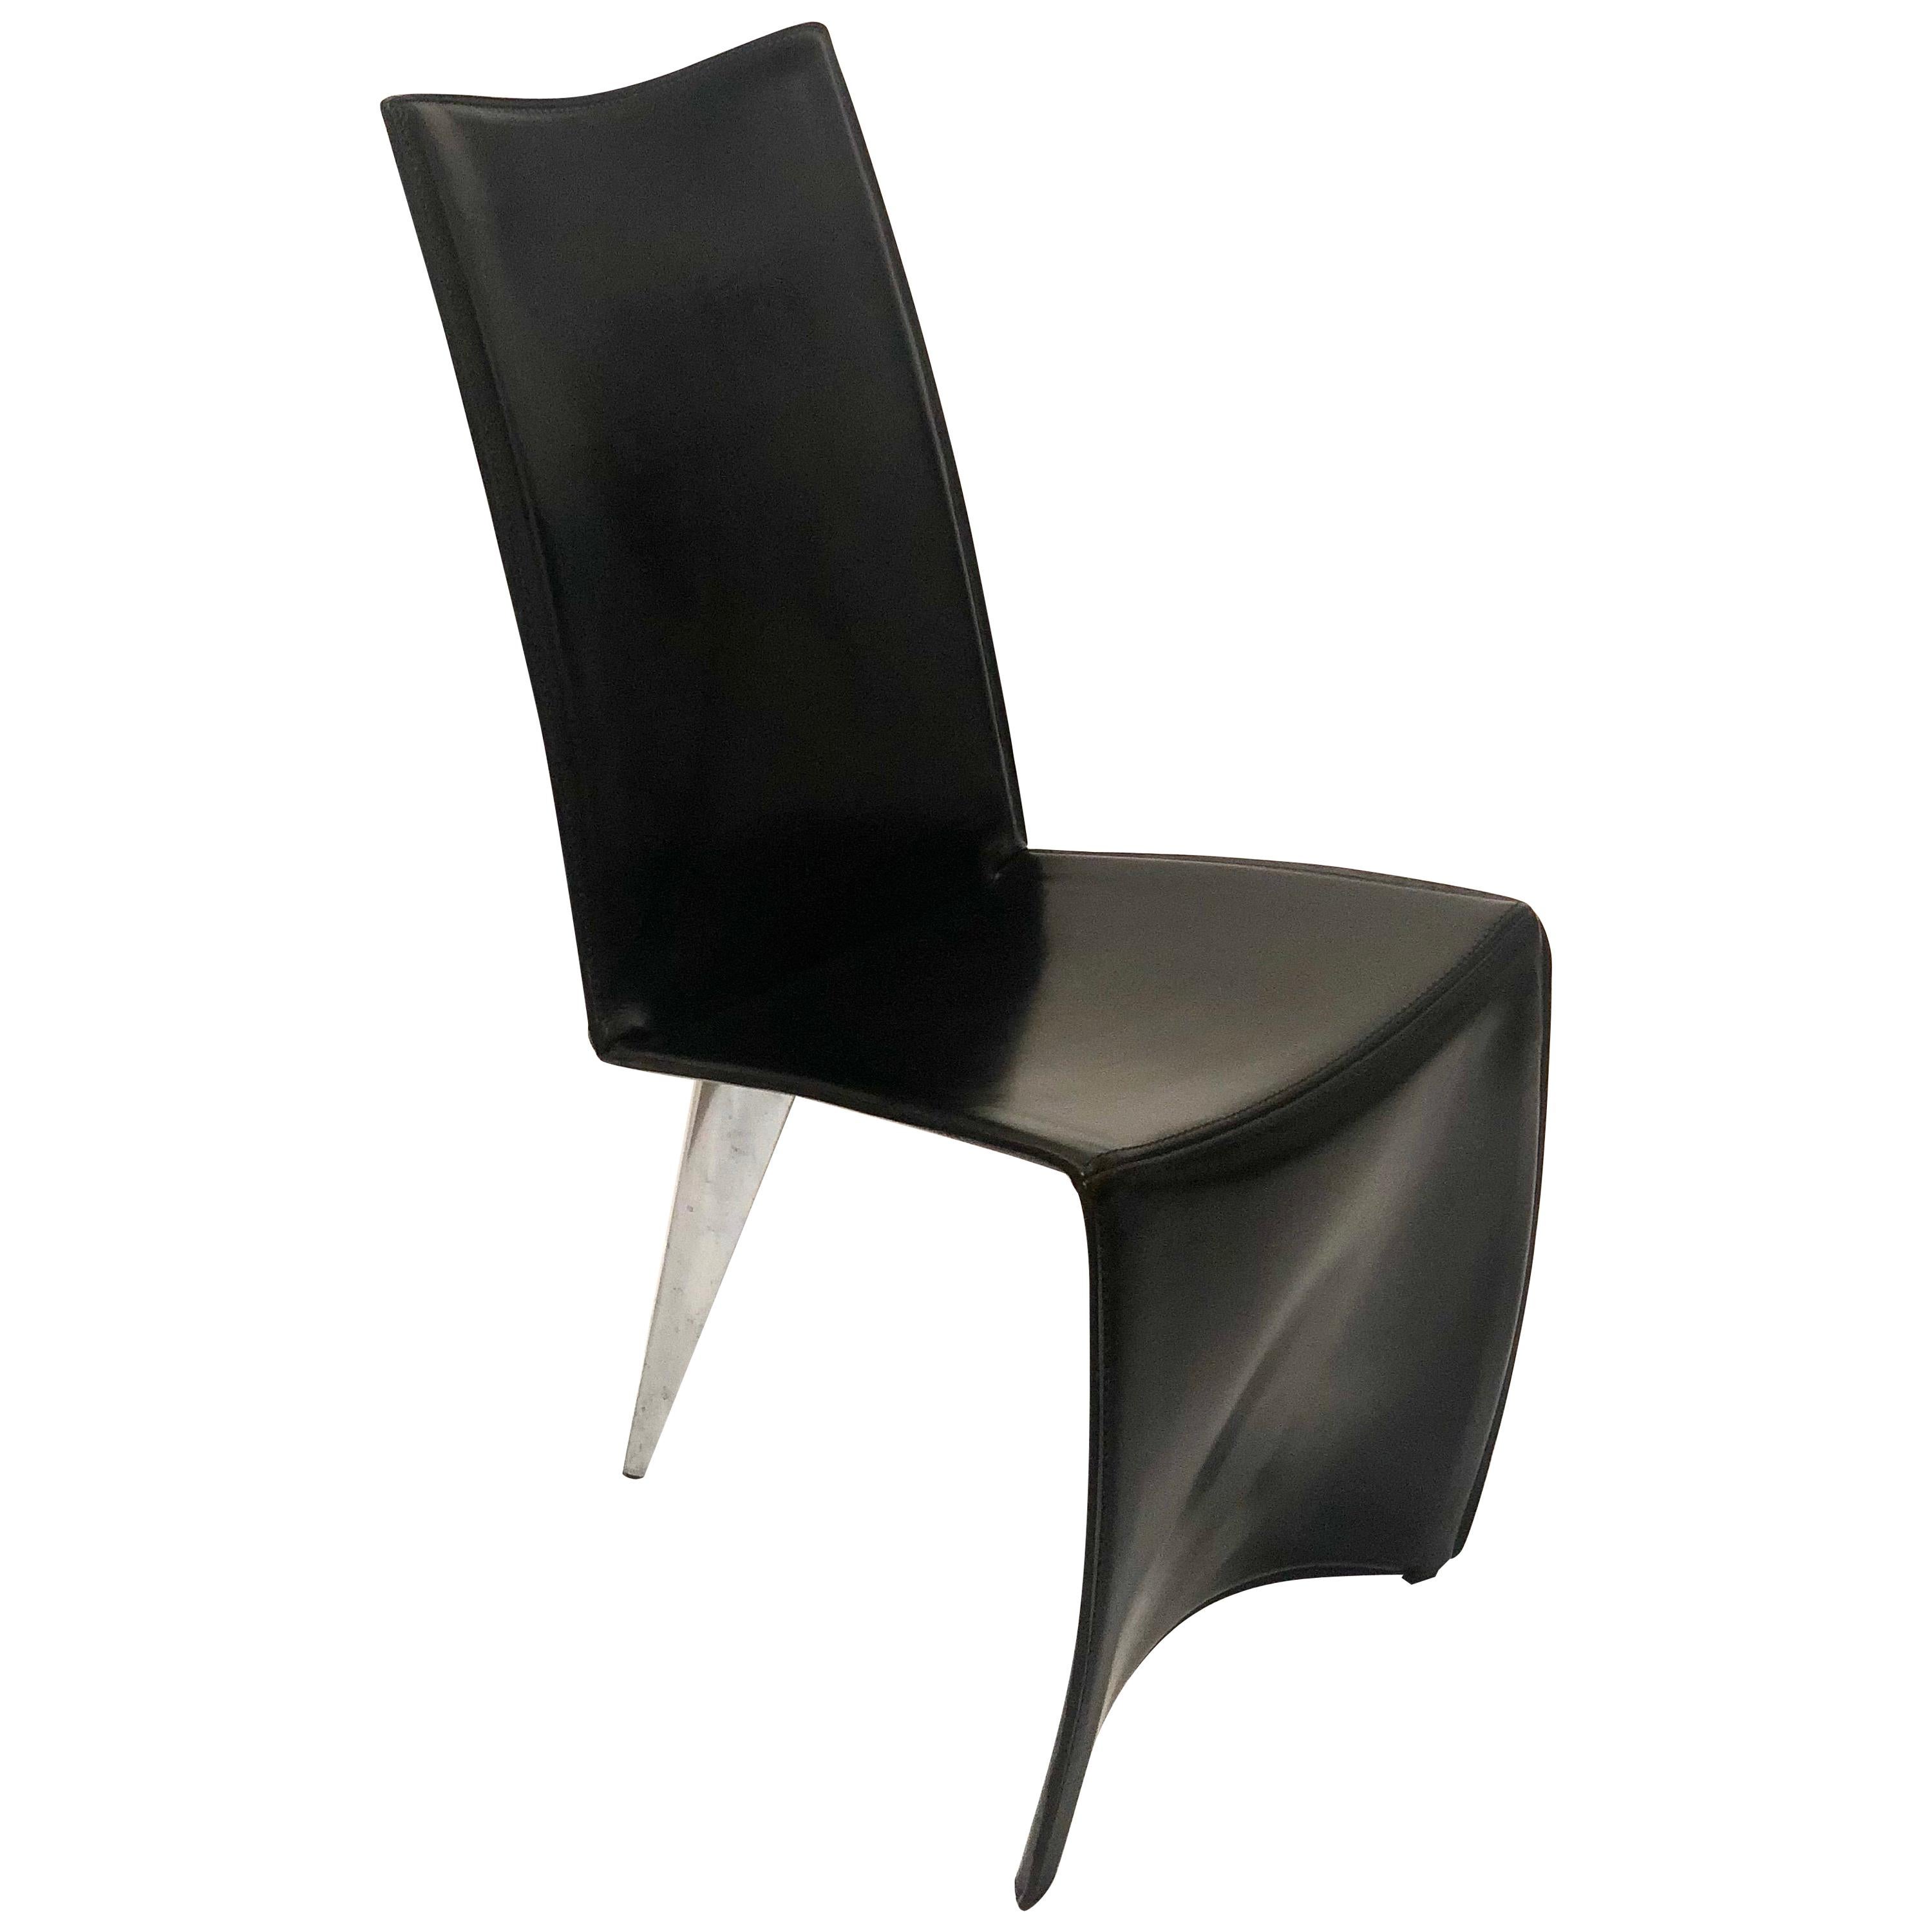 Striking Ed Archer Chair by Philippe Starck for Driade